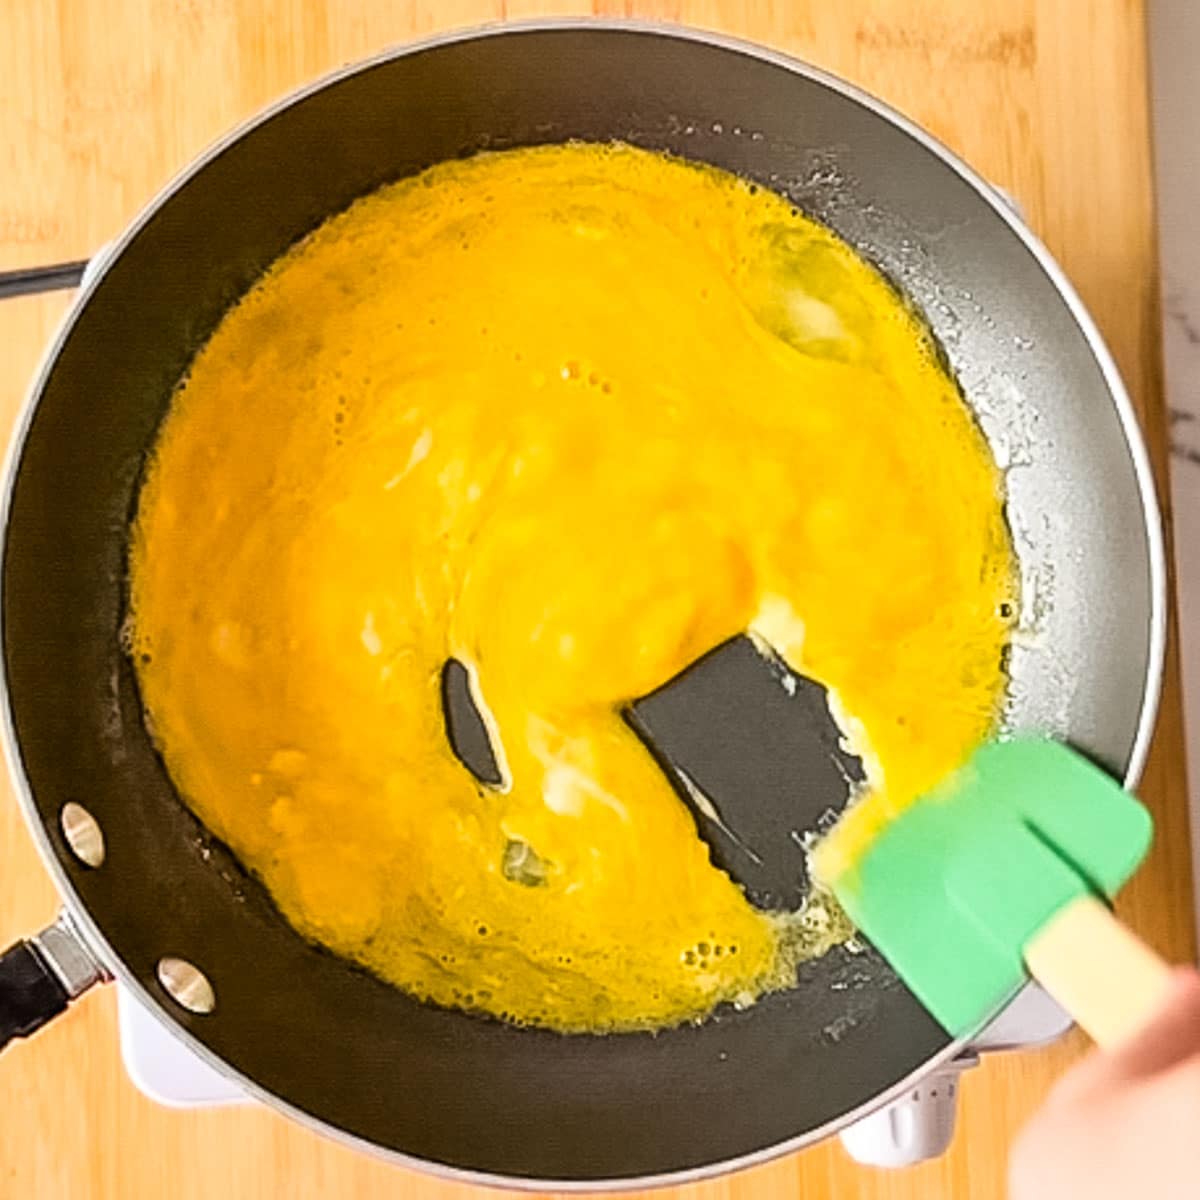 a green rubber spatula forms small curds in scrambled eggs as they cook.